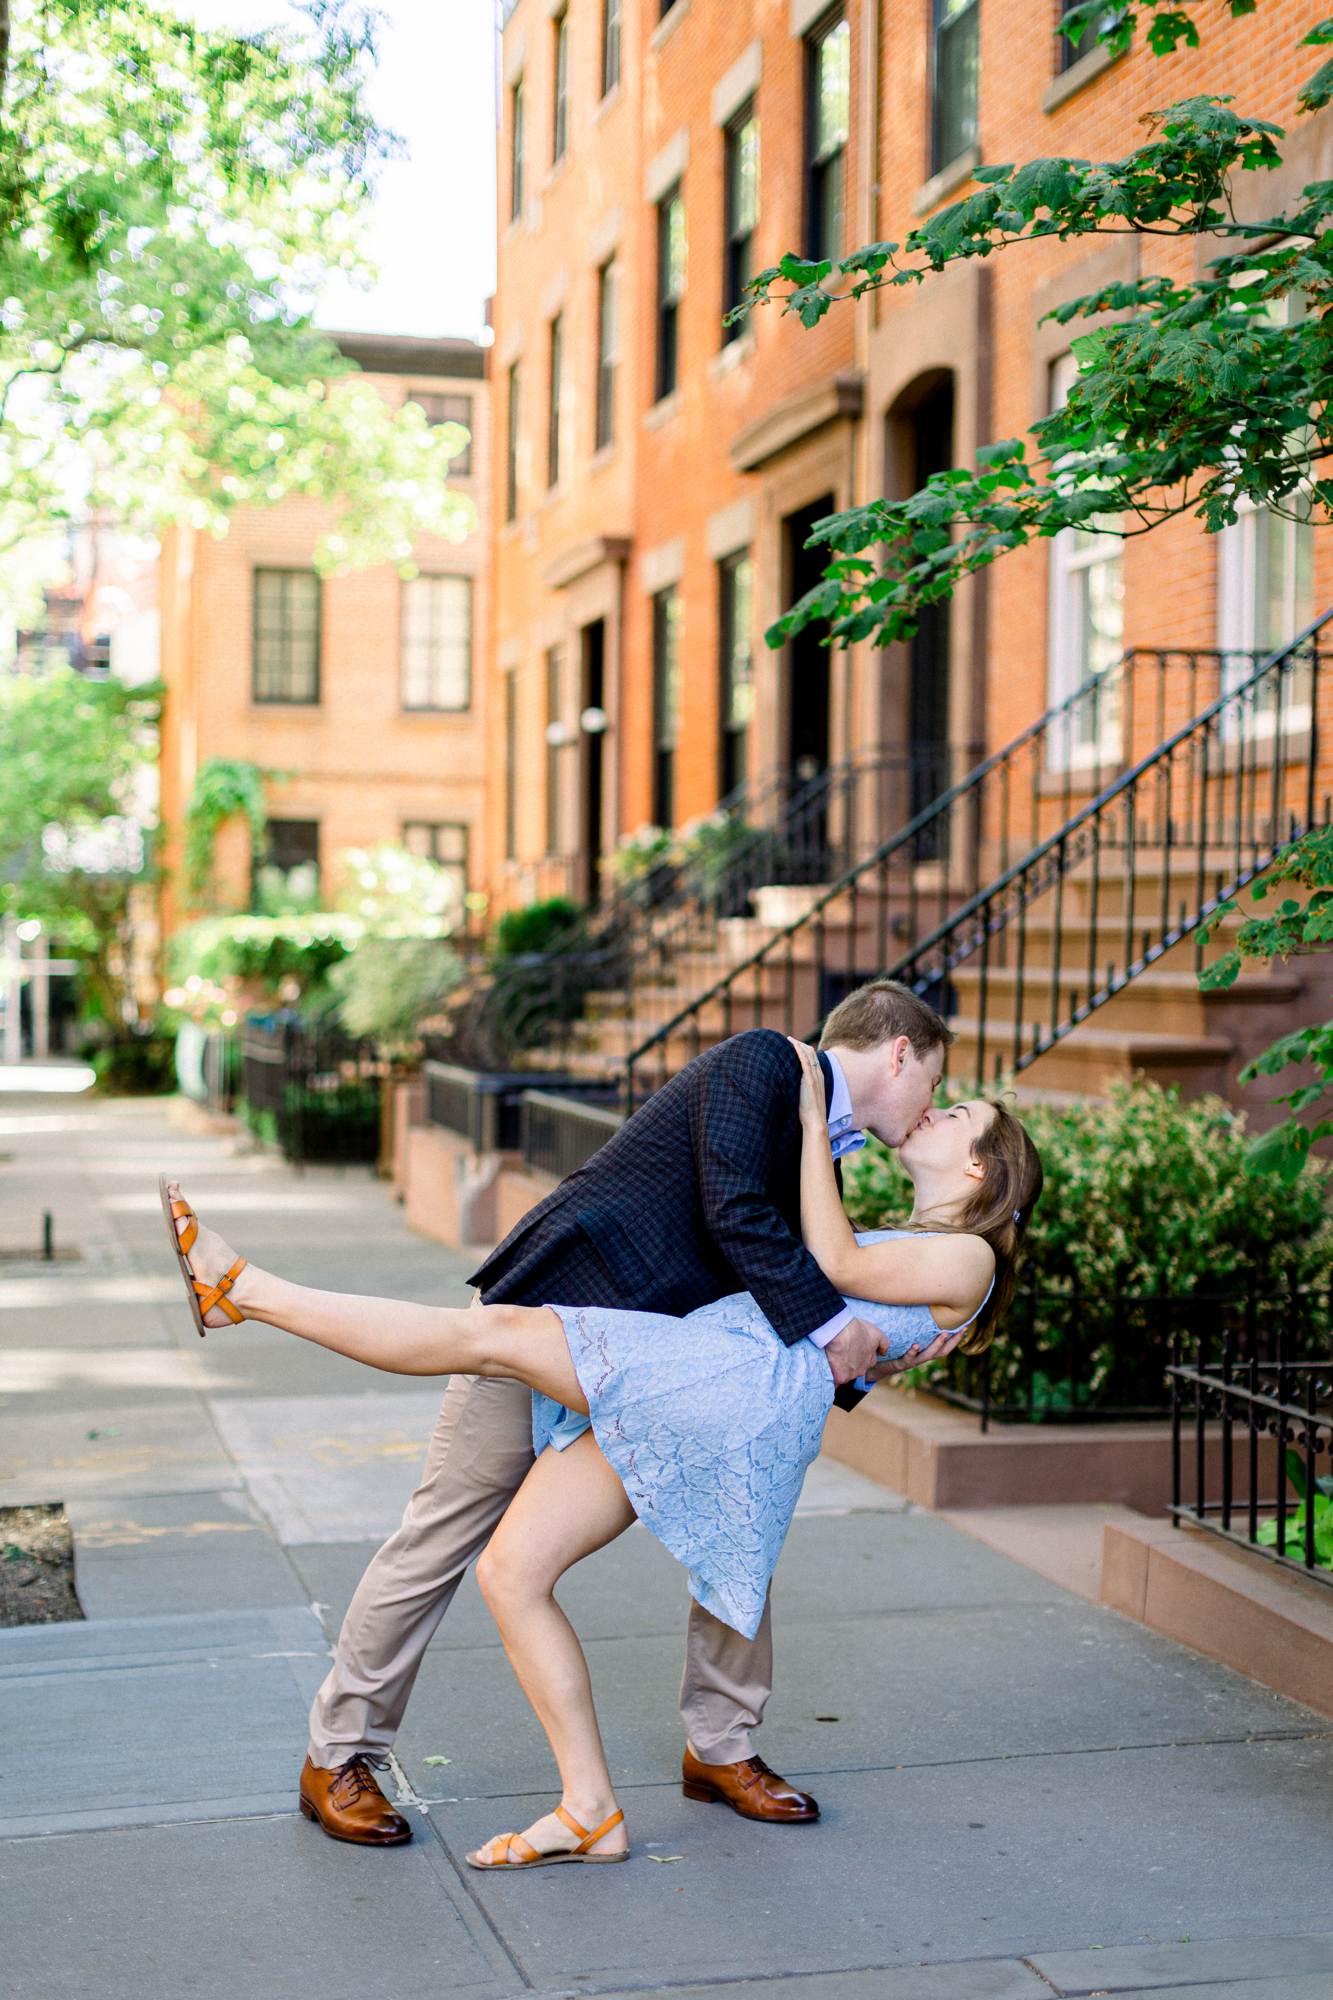 Intimate Pose Ideas for your Engagement Session